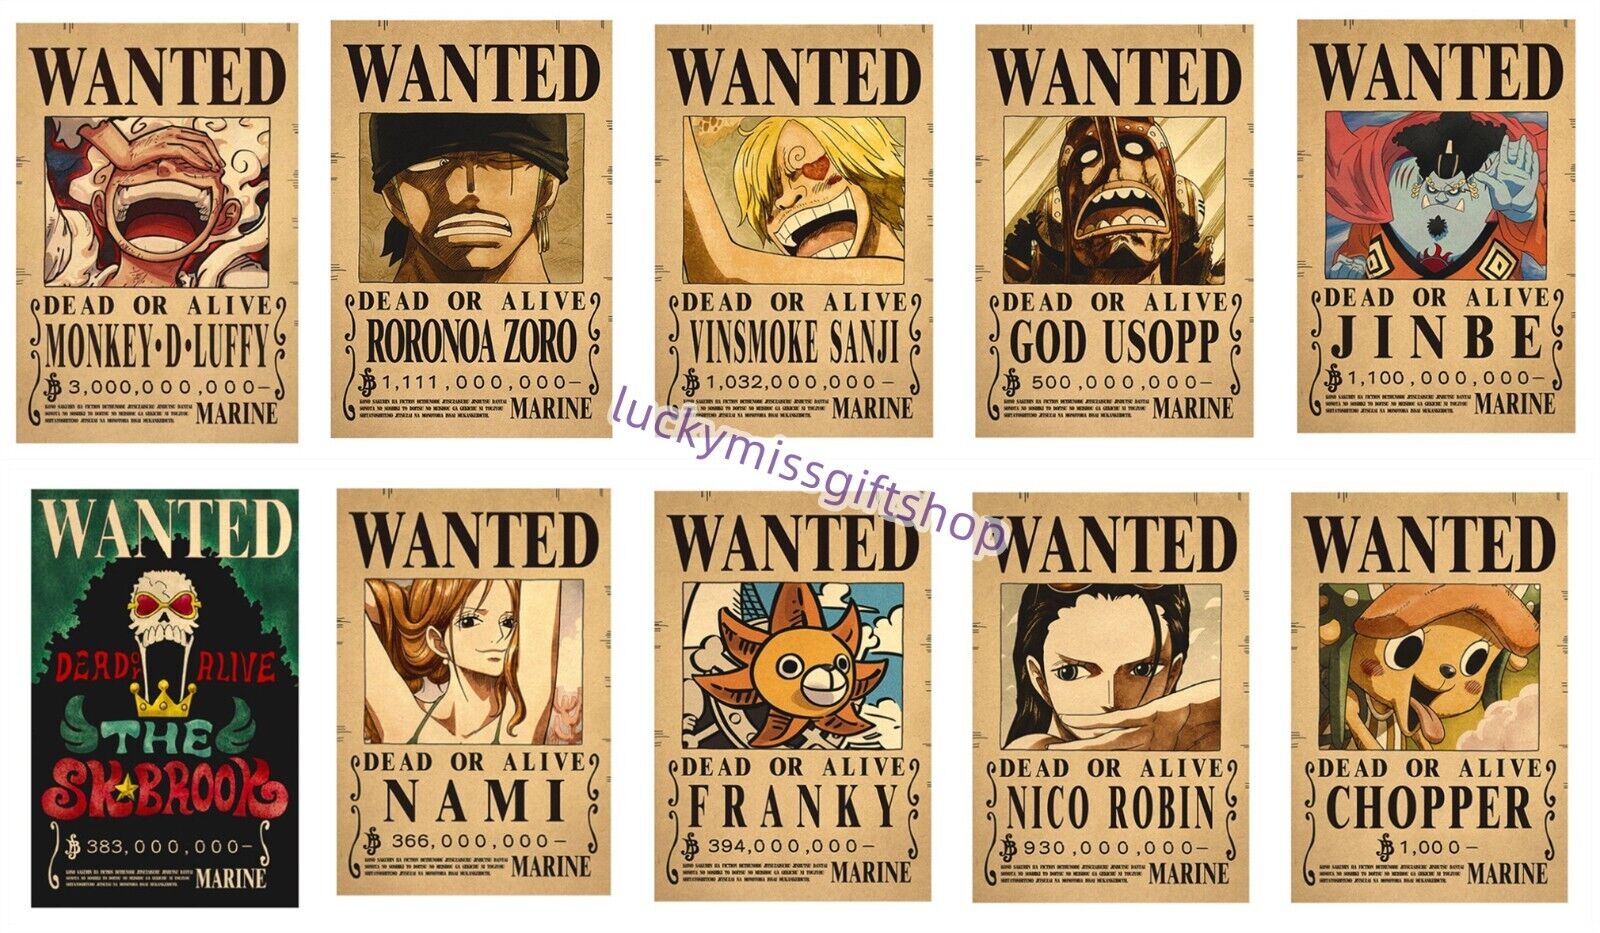 10 Pcs Anime One Piece Luffy Straw Hat Pirates Wanted Poster HIGH QUALIT